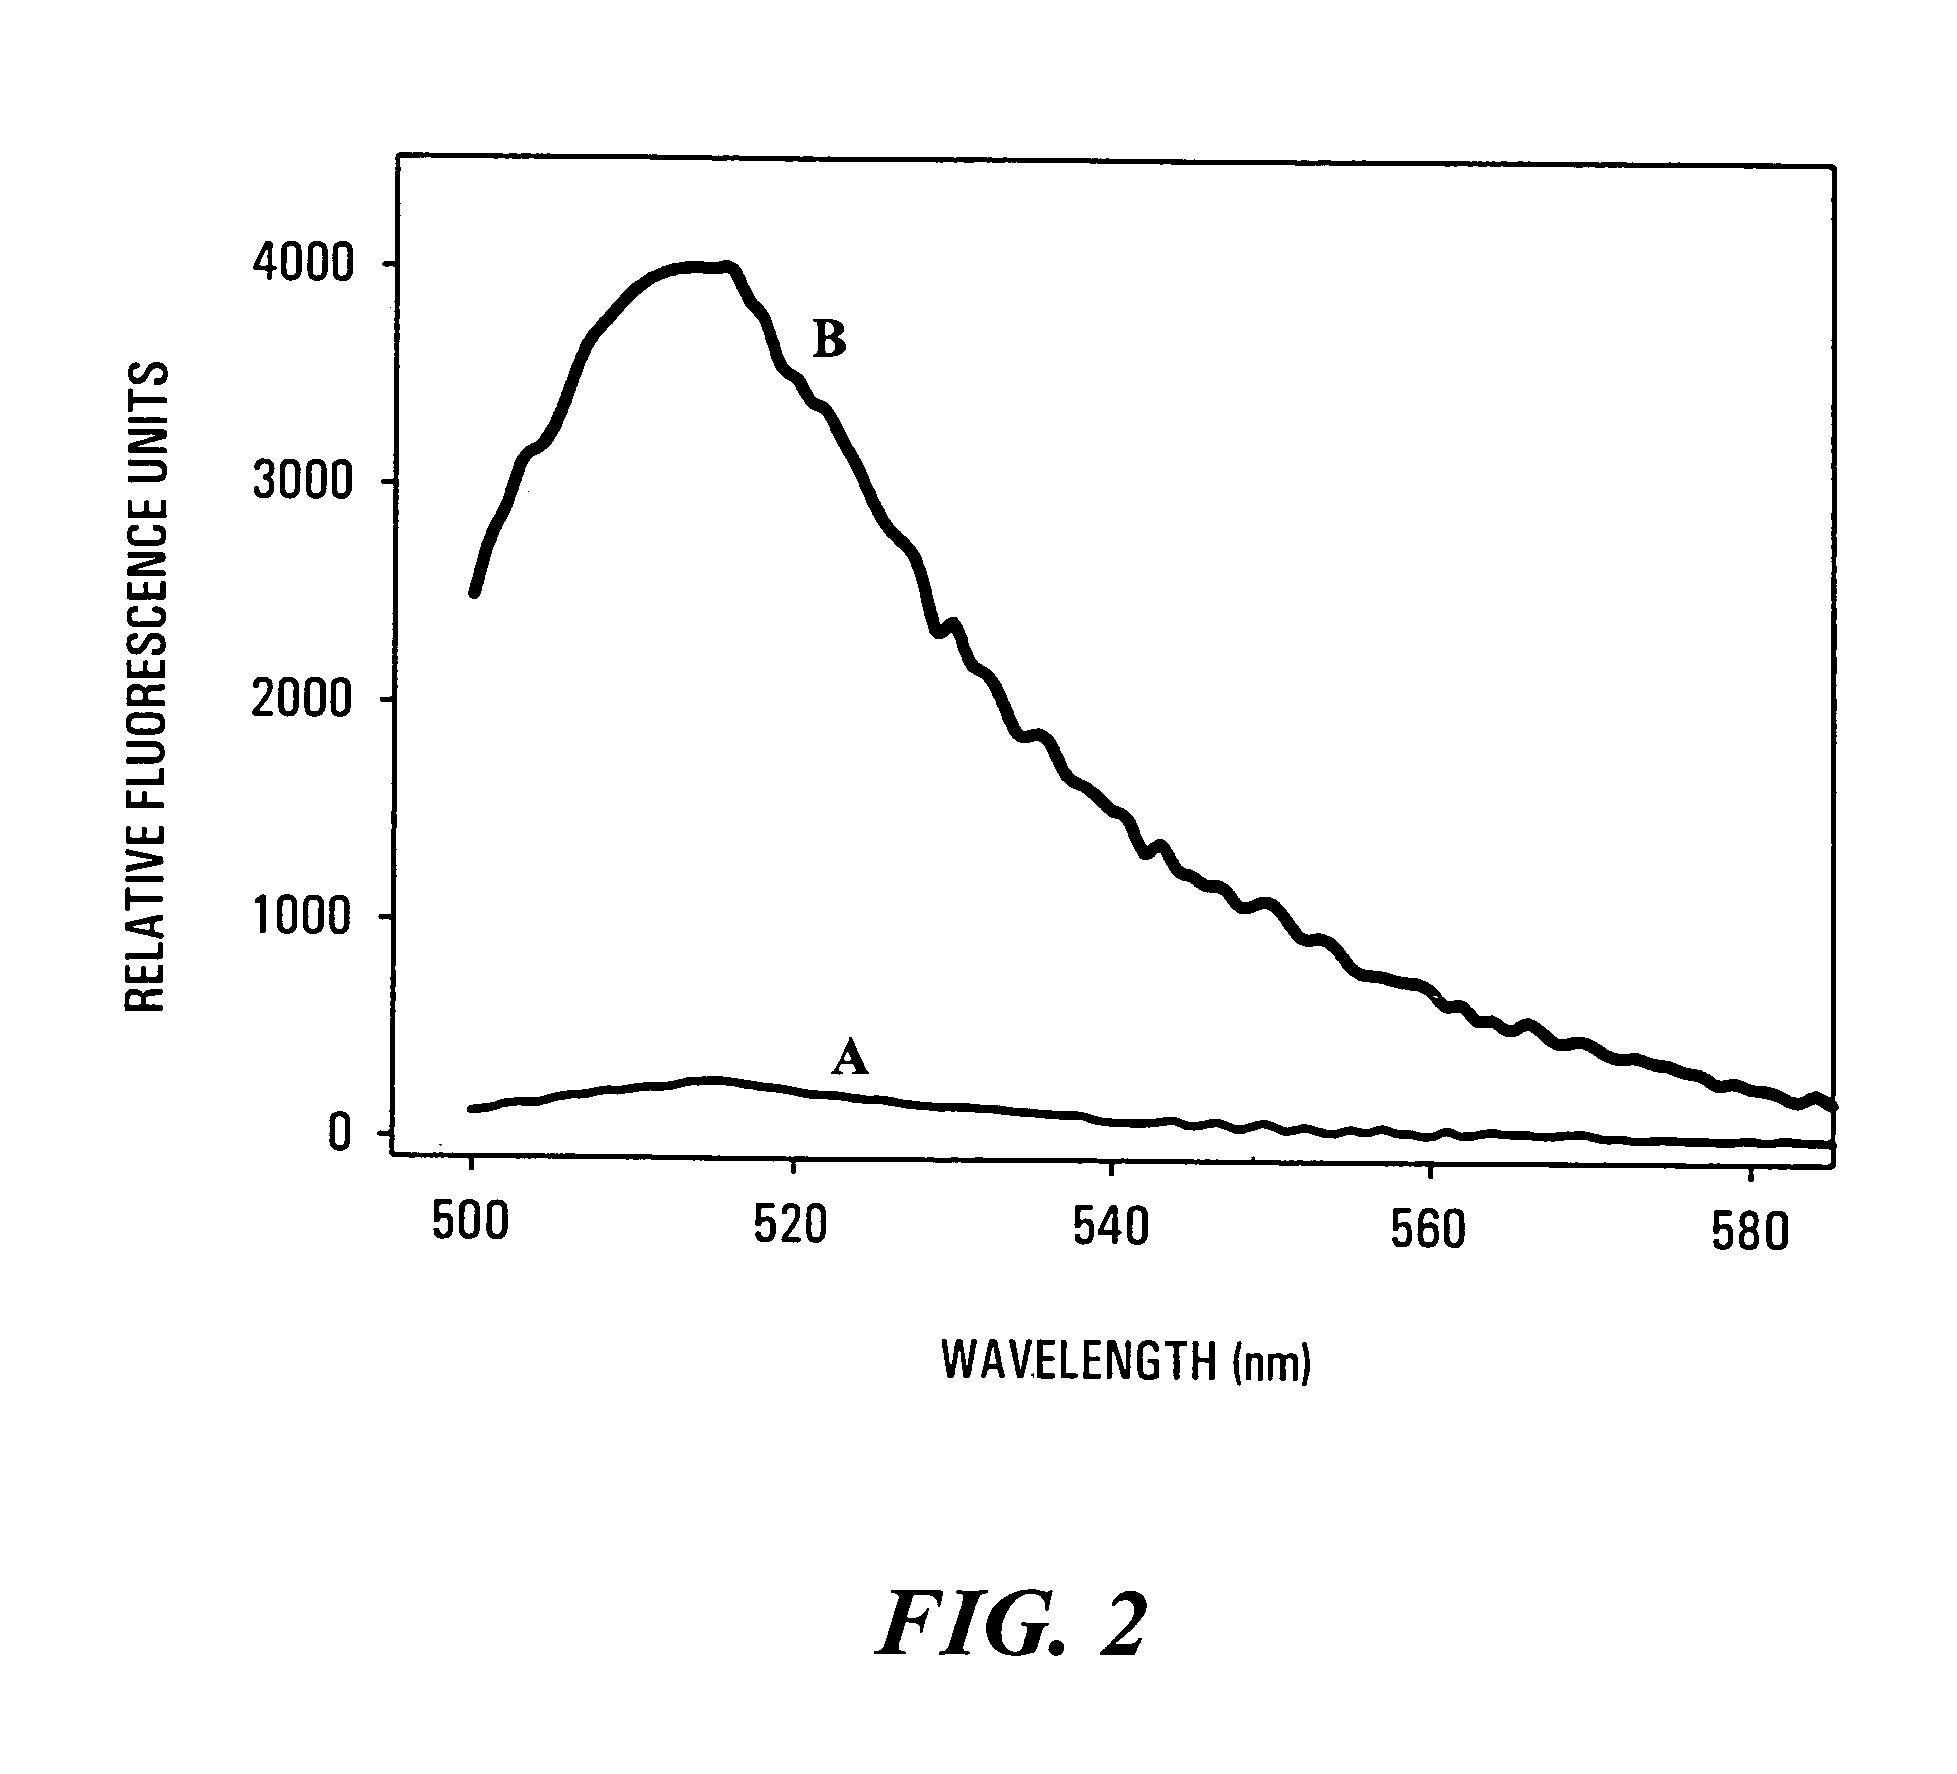 Method of identifying or characterizing a compound that modulates ribonuclease H activity